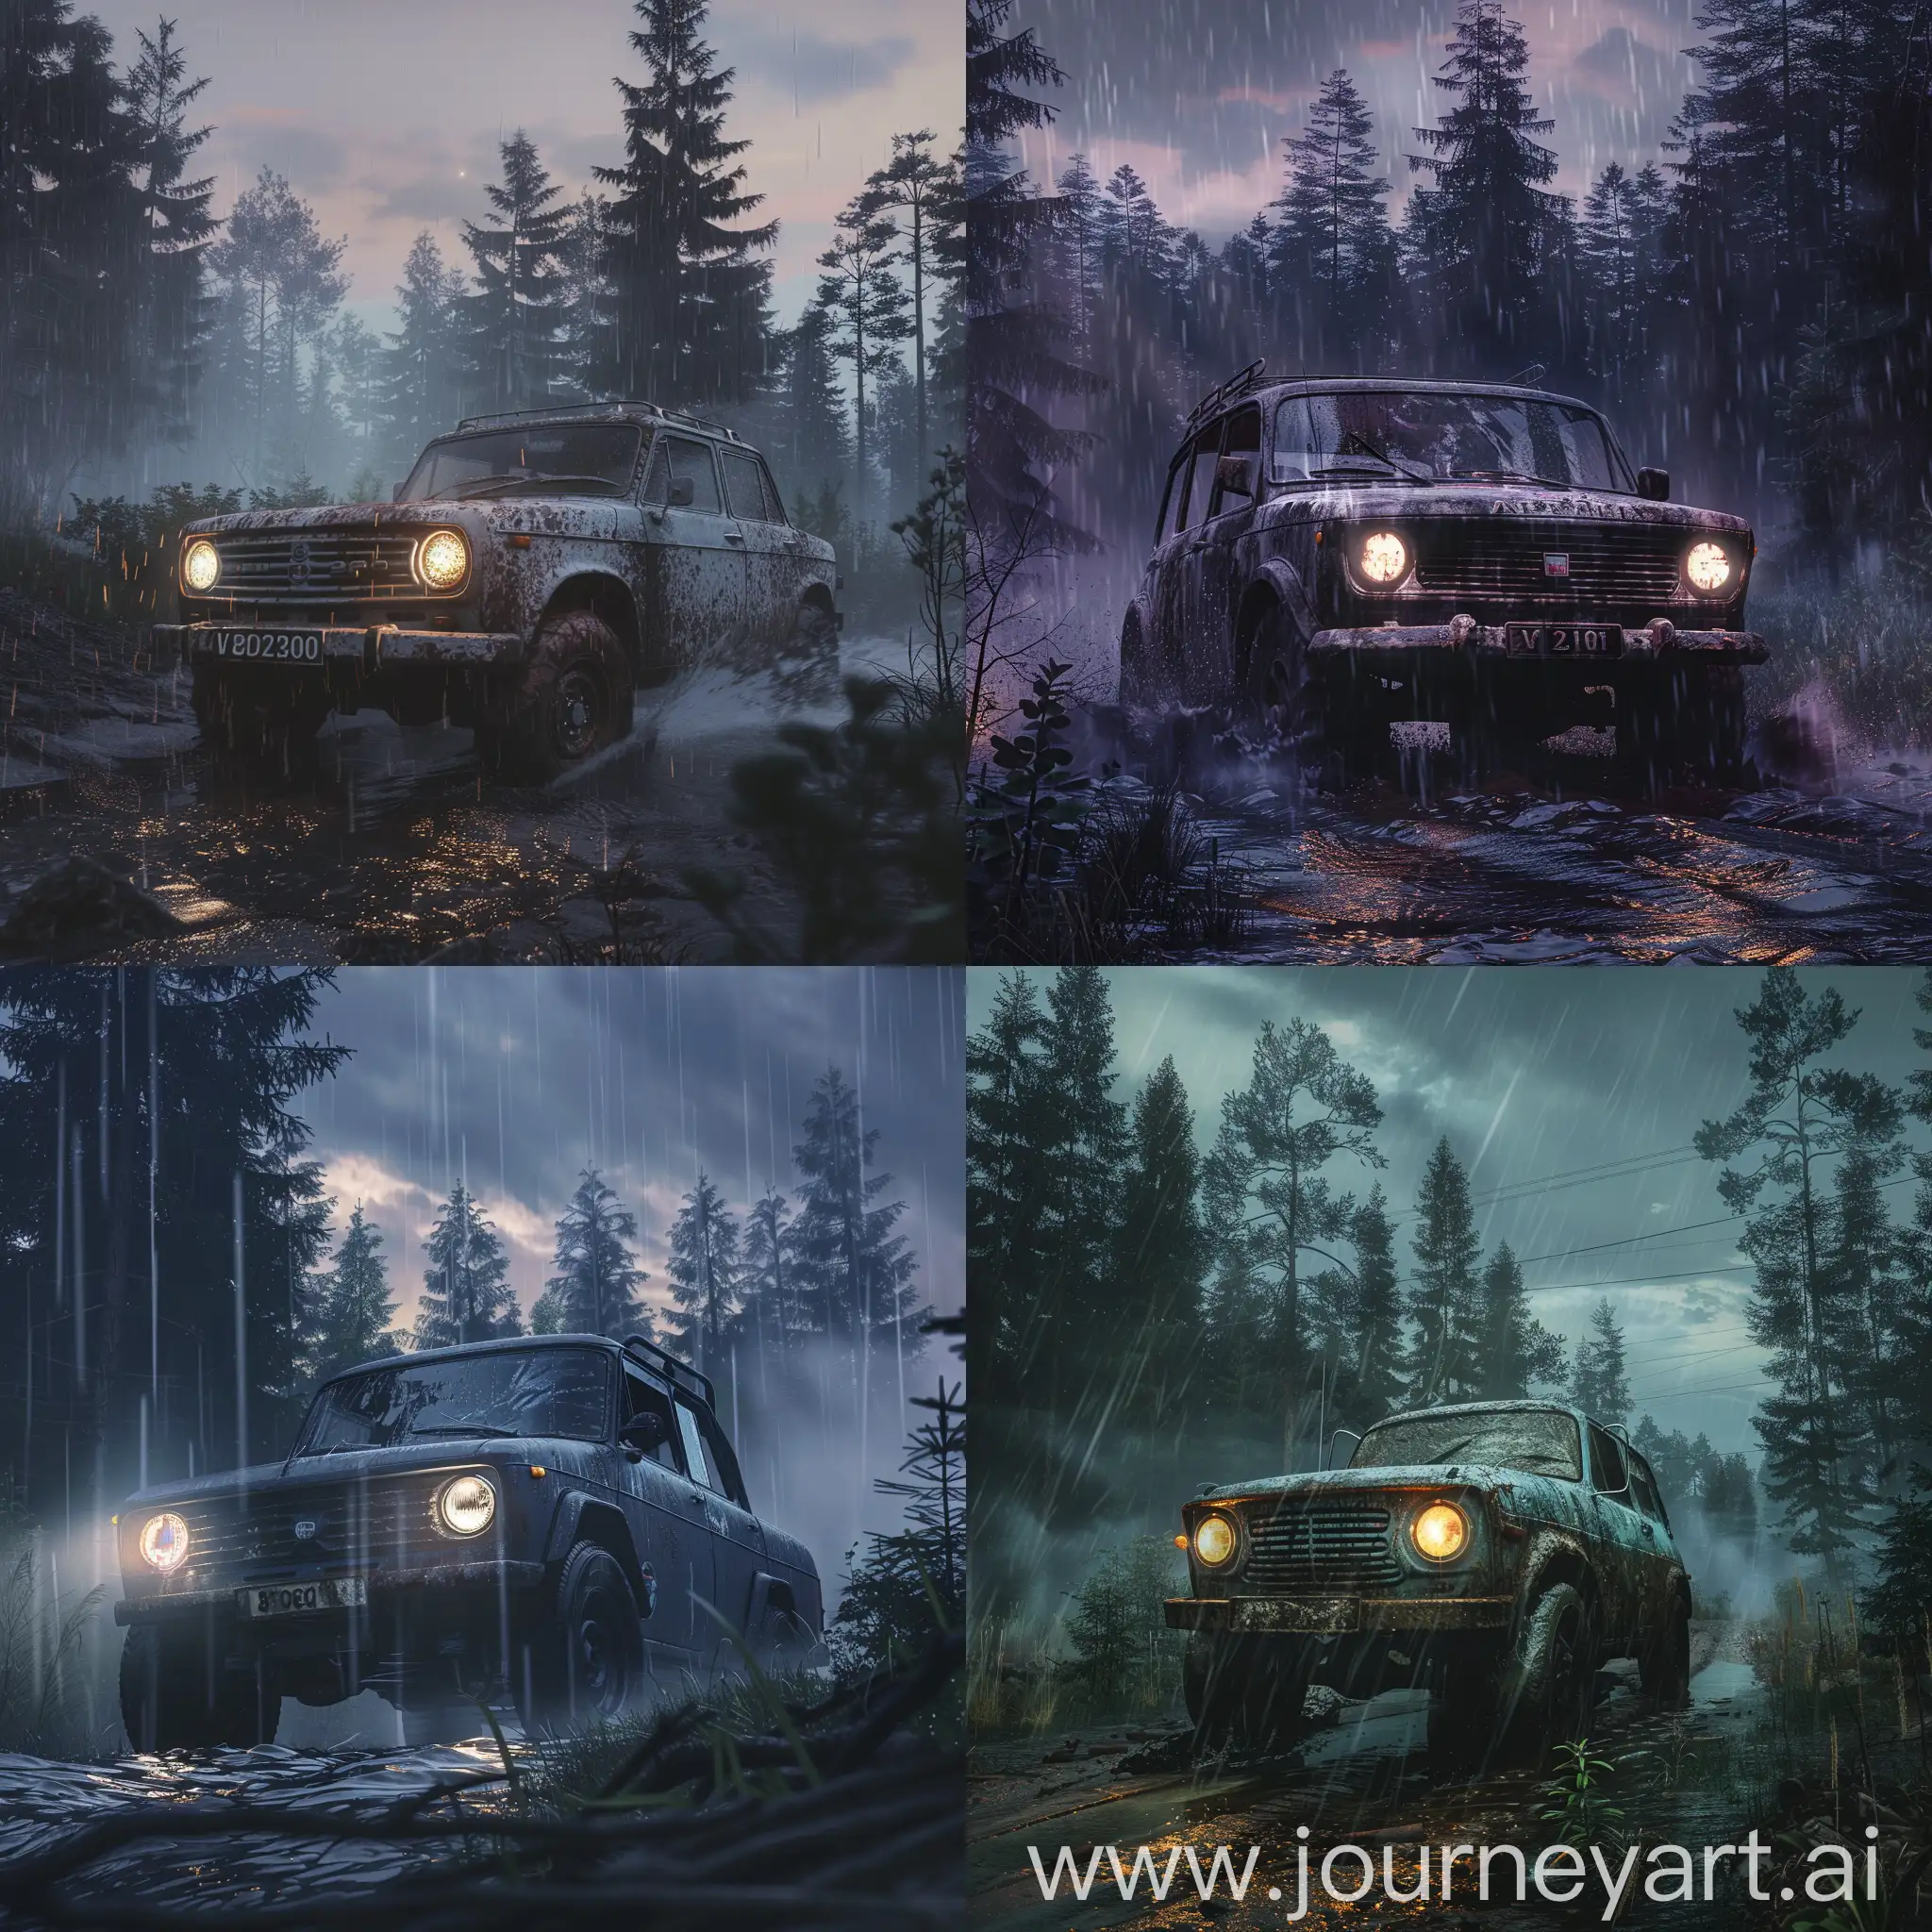 Vintage-Car-OffRoading-Adventure-in-Twilight-Fir-Forest